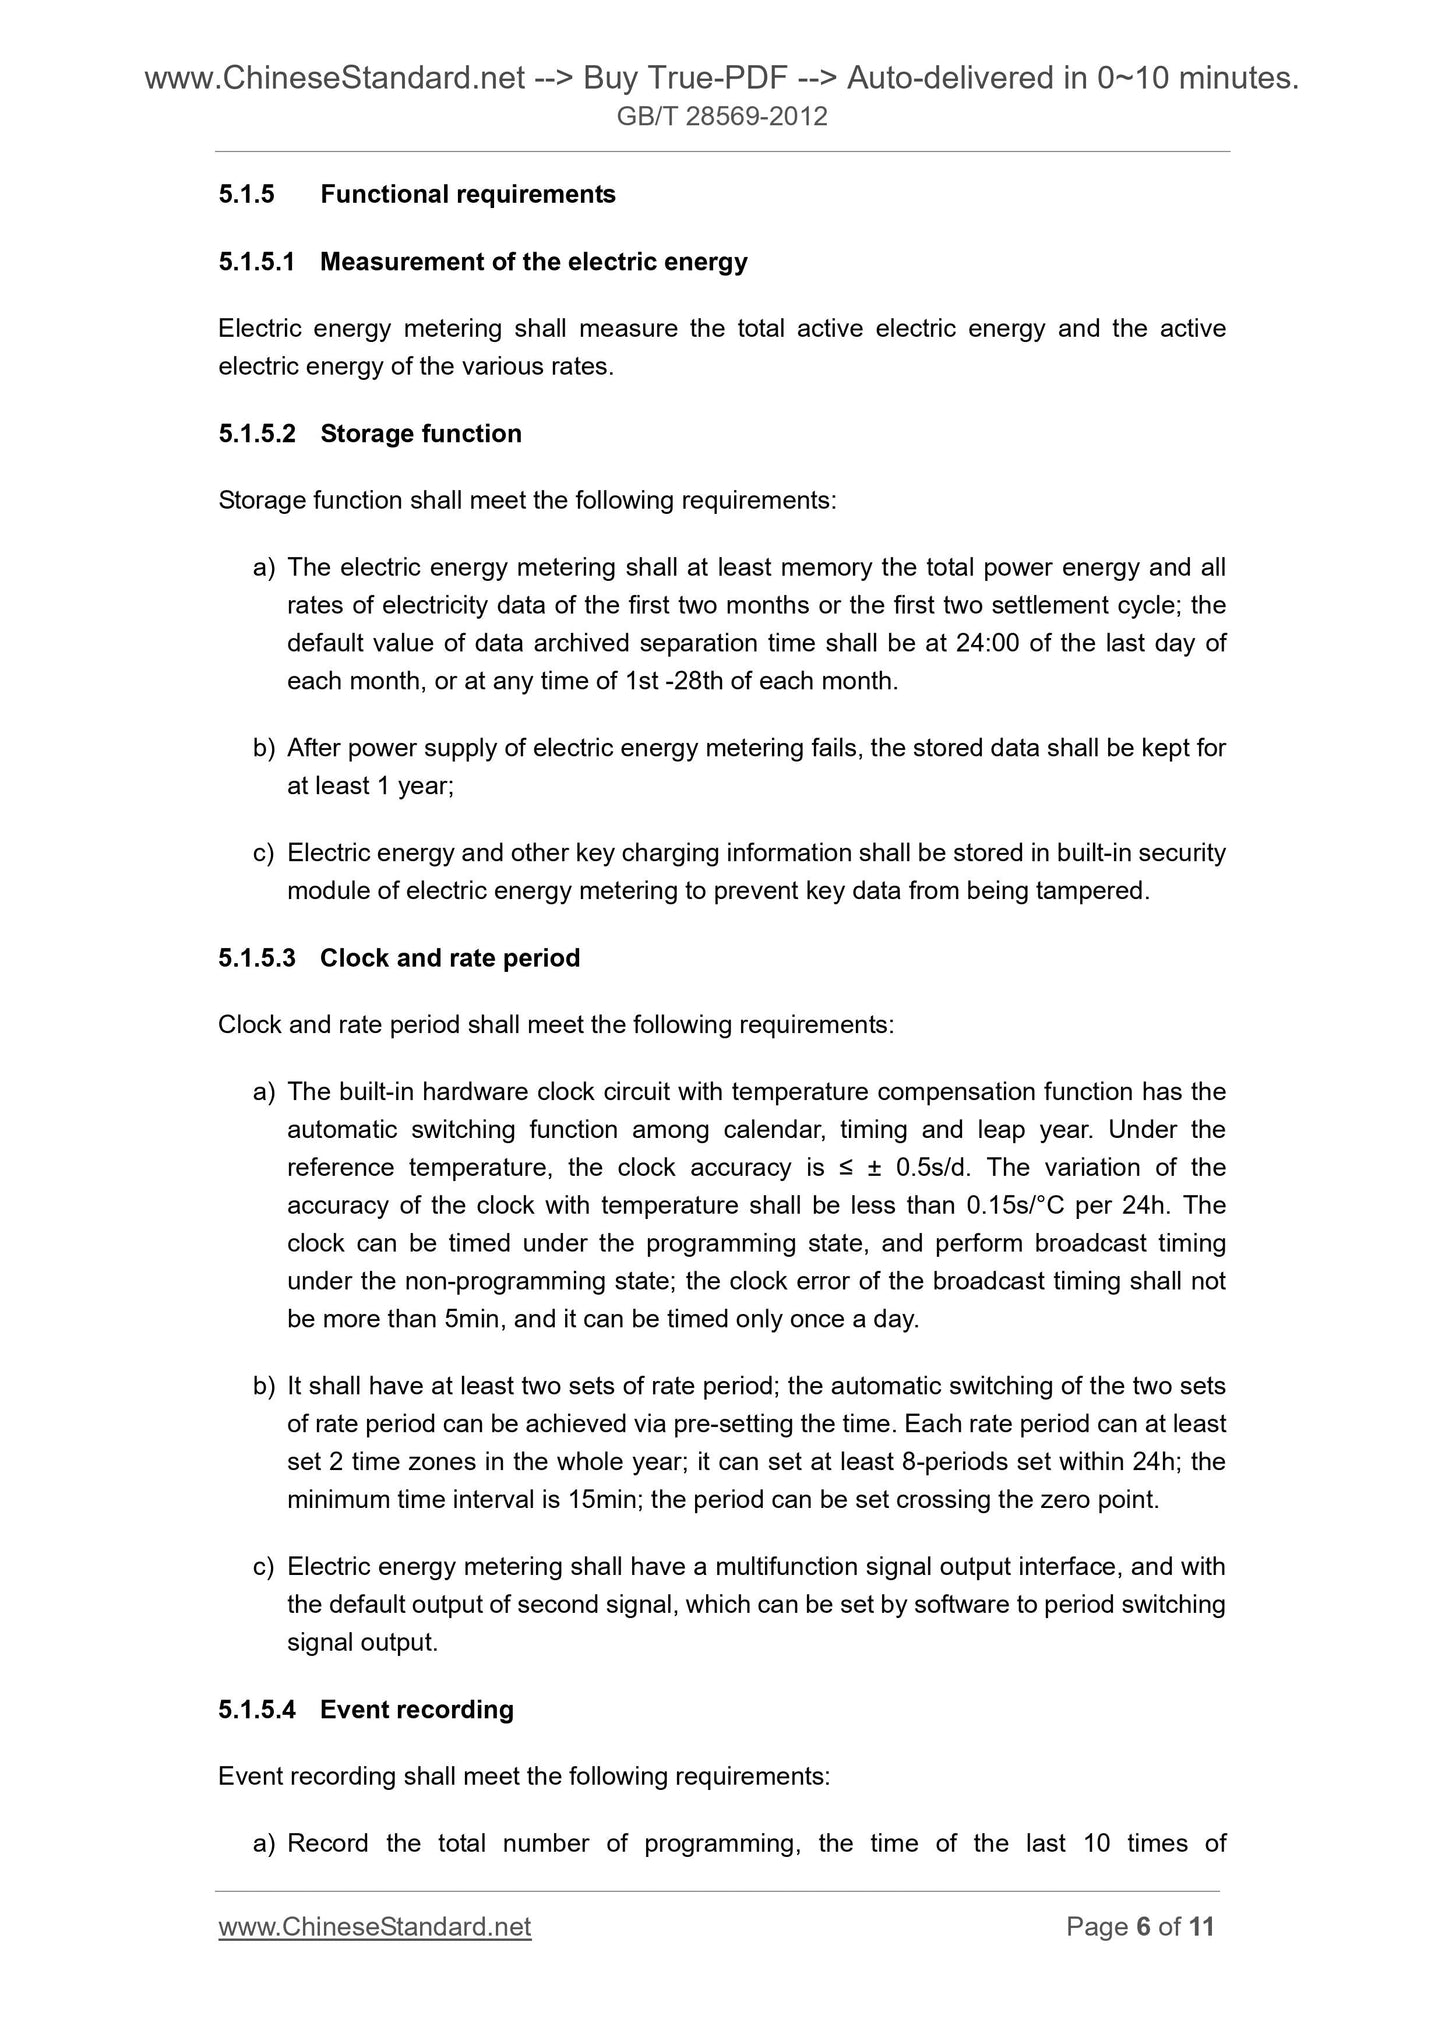 GB/T 28569-2012 Page 5